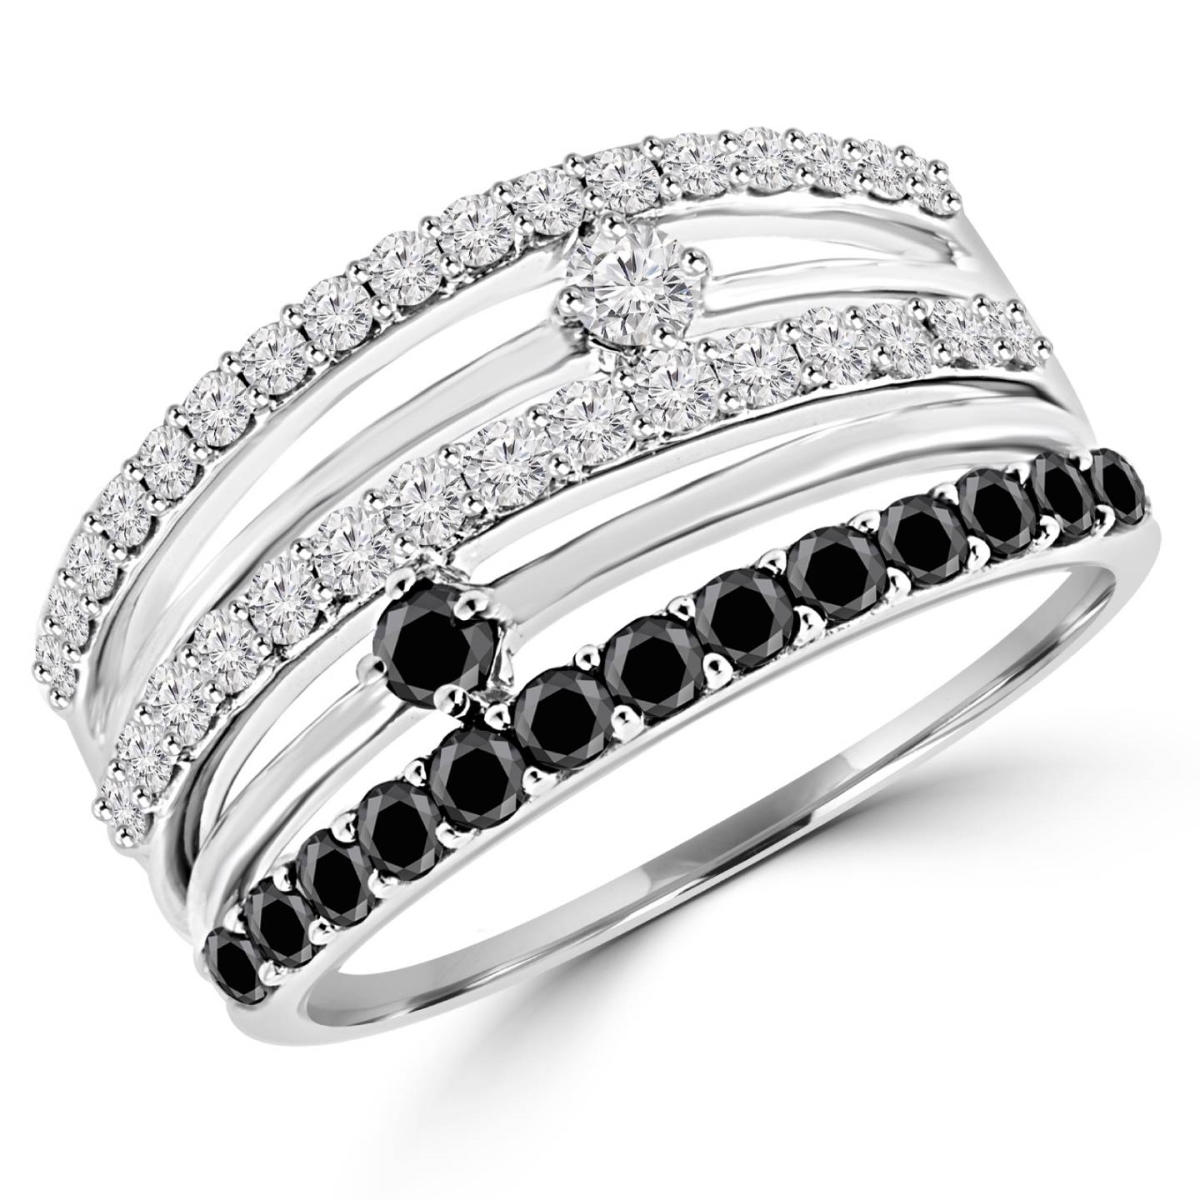 Picture of Majesty Diamonds MDR140107-P 0.8 CTW 5-Row Black & White Diamond Fashion Cocktail Ring in 14K White Gold